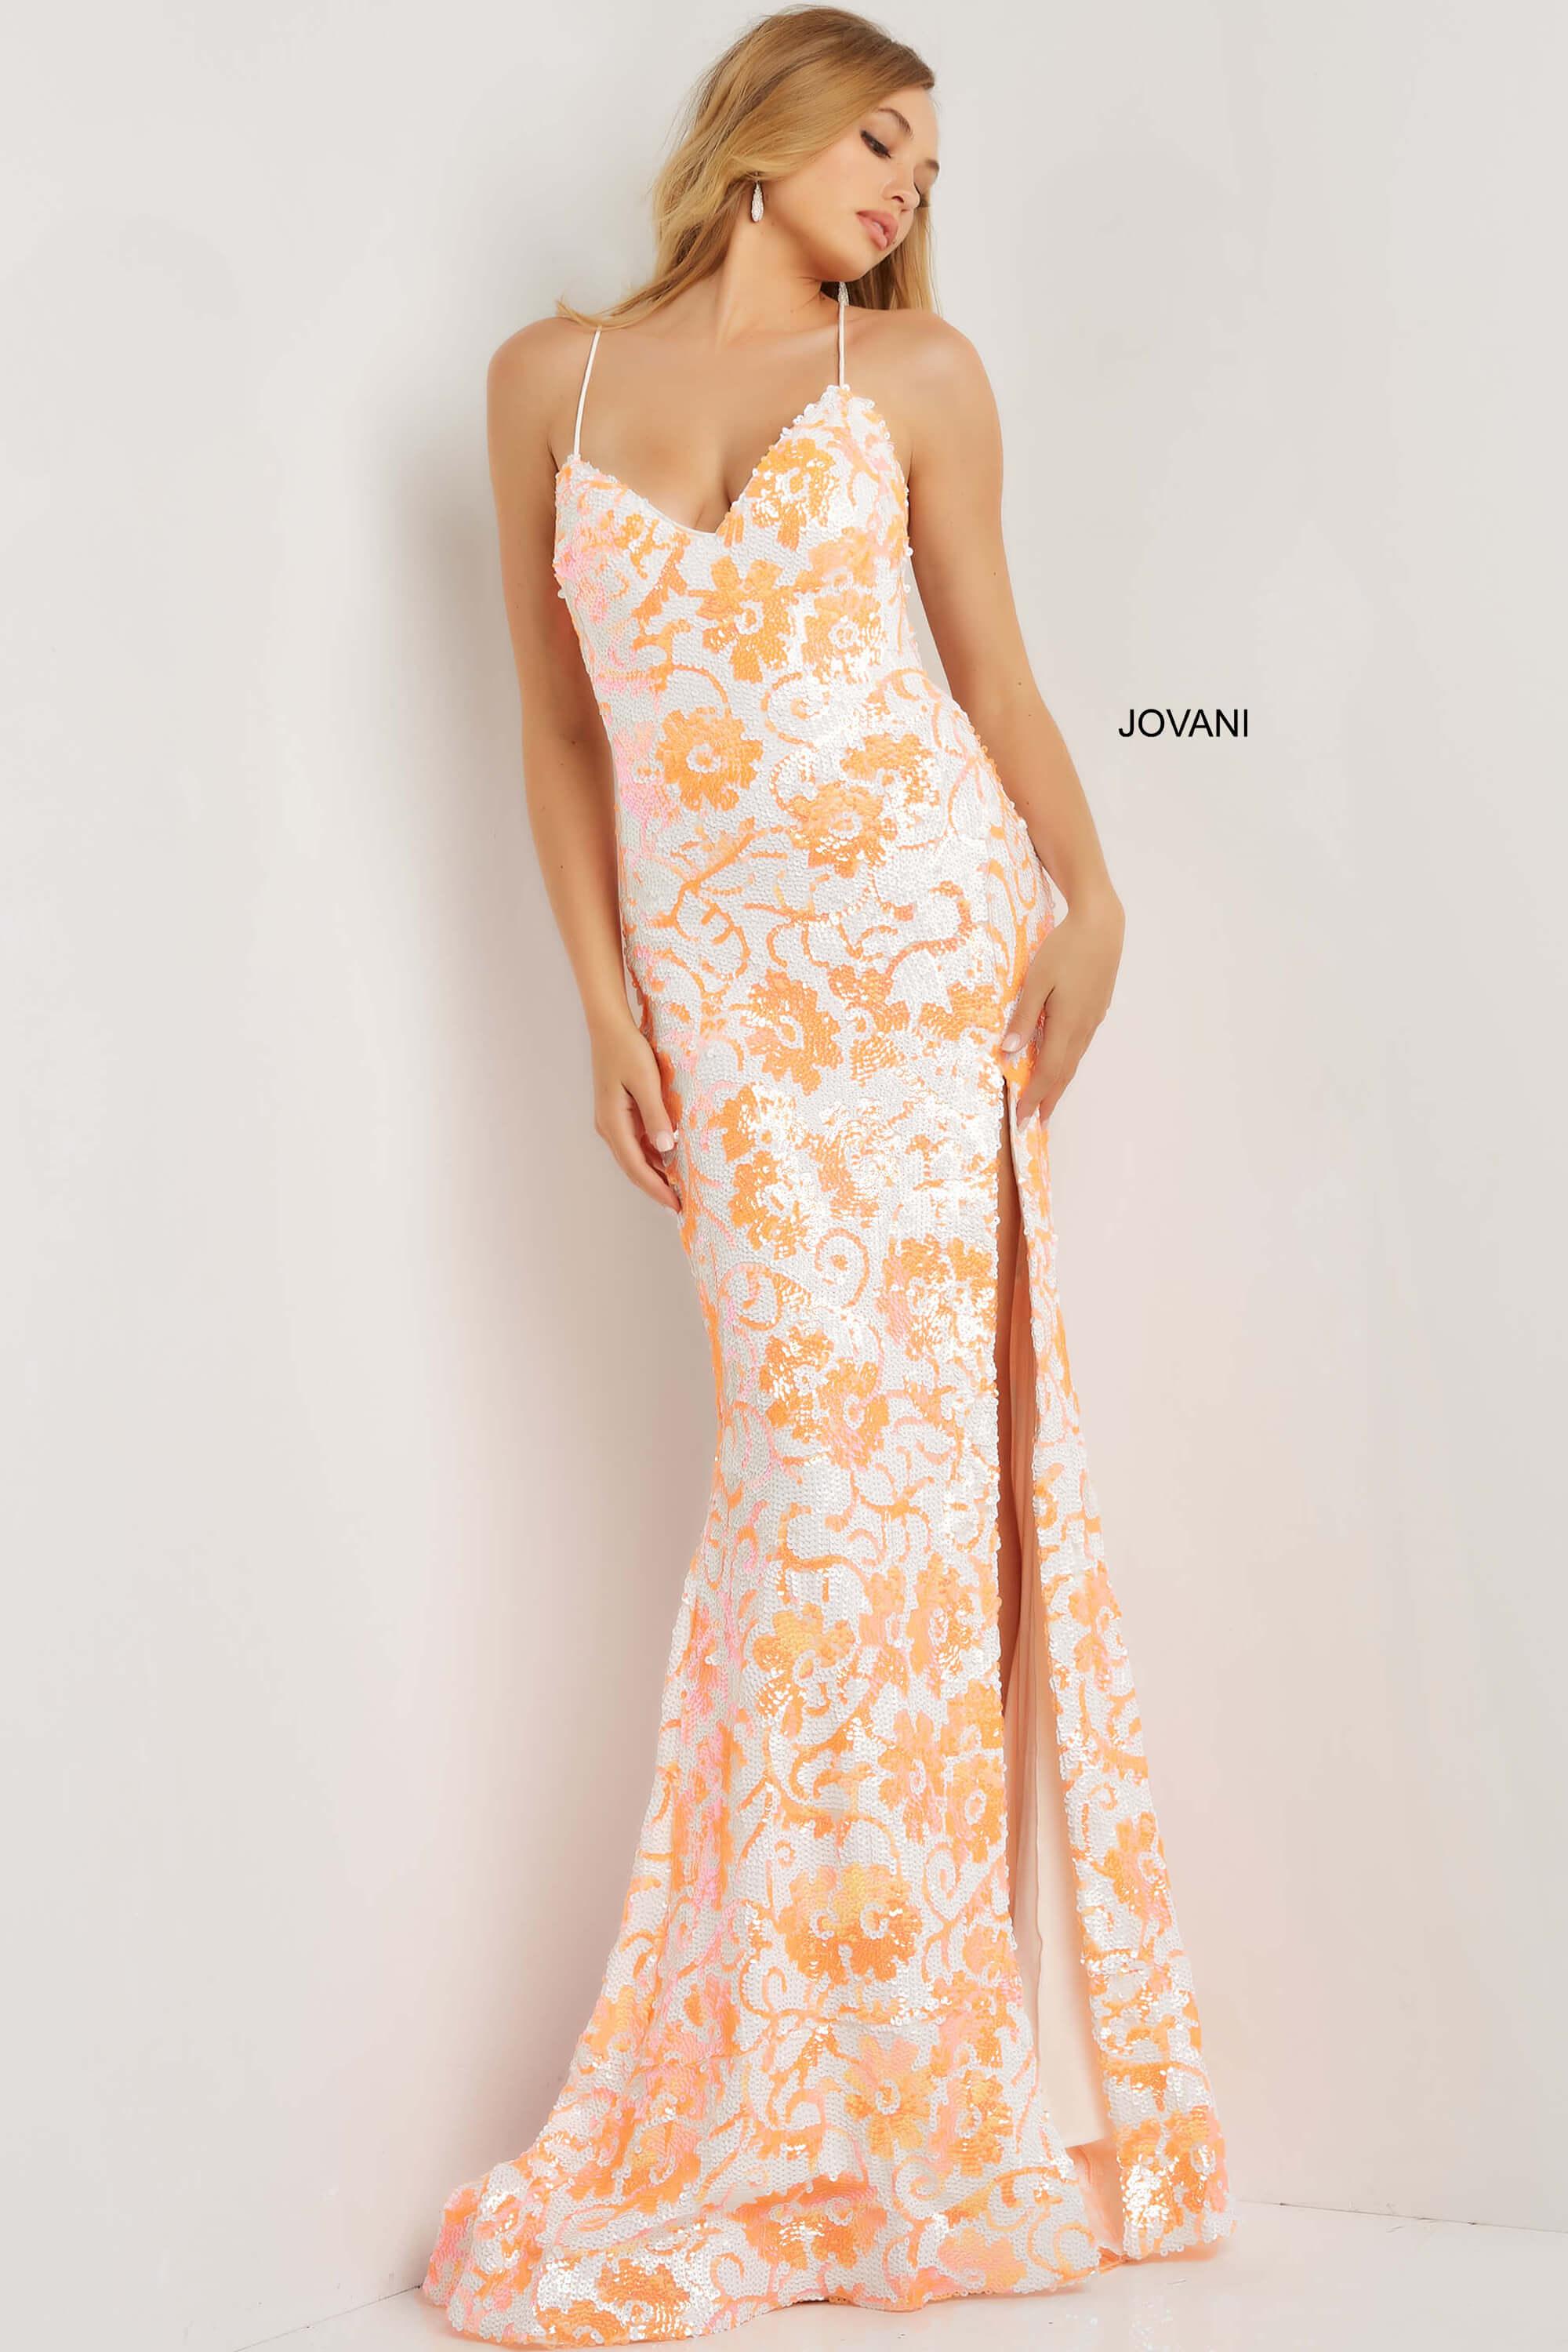 Jovani Spaghetti Strap Long Fitted Gown 08255 - The Dress Outlet